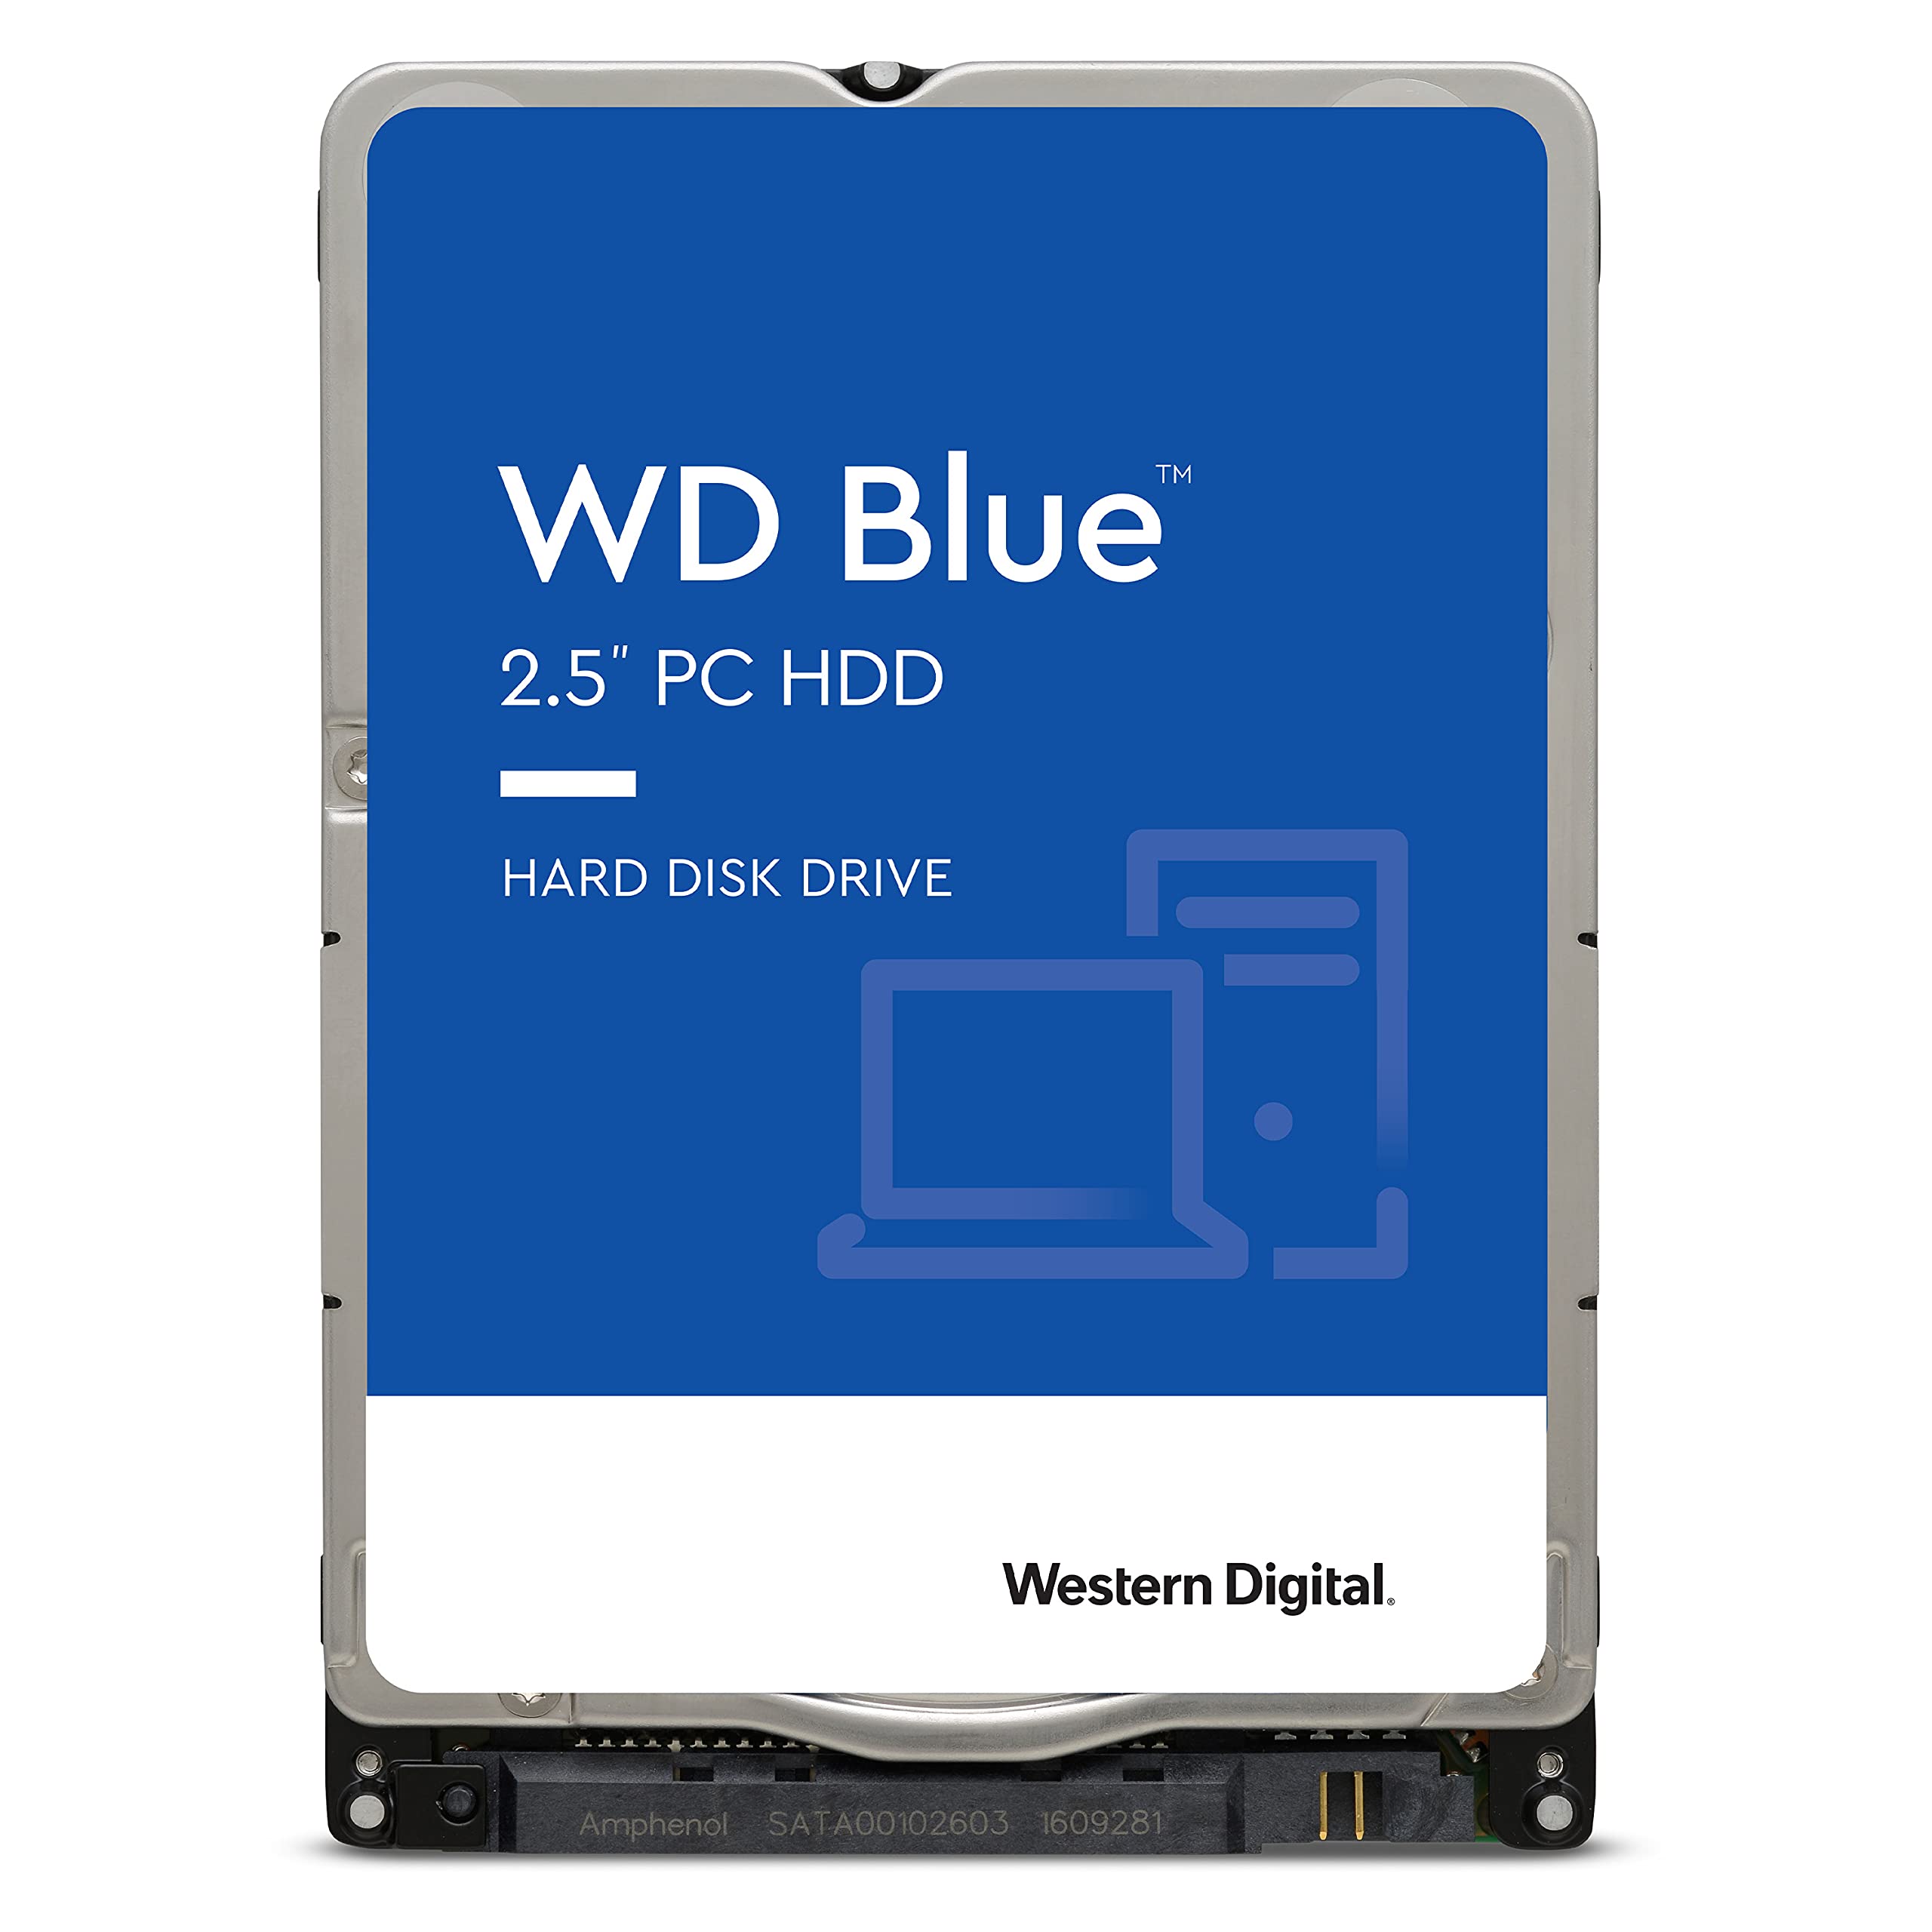 Wd Blue Laptop Everyday 1tb Wd Retail Kit Hdd Mobile Wdbmyh0010bnc Ersn 718037815466